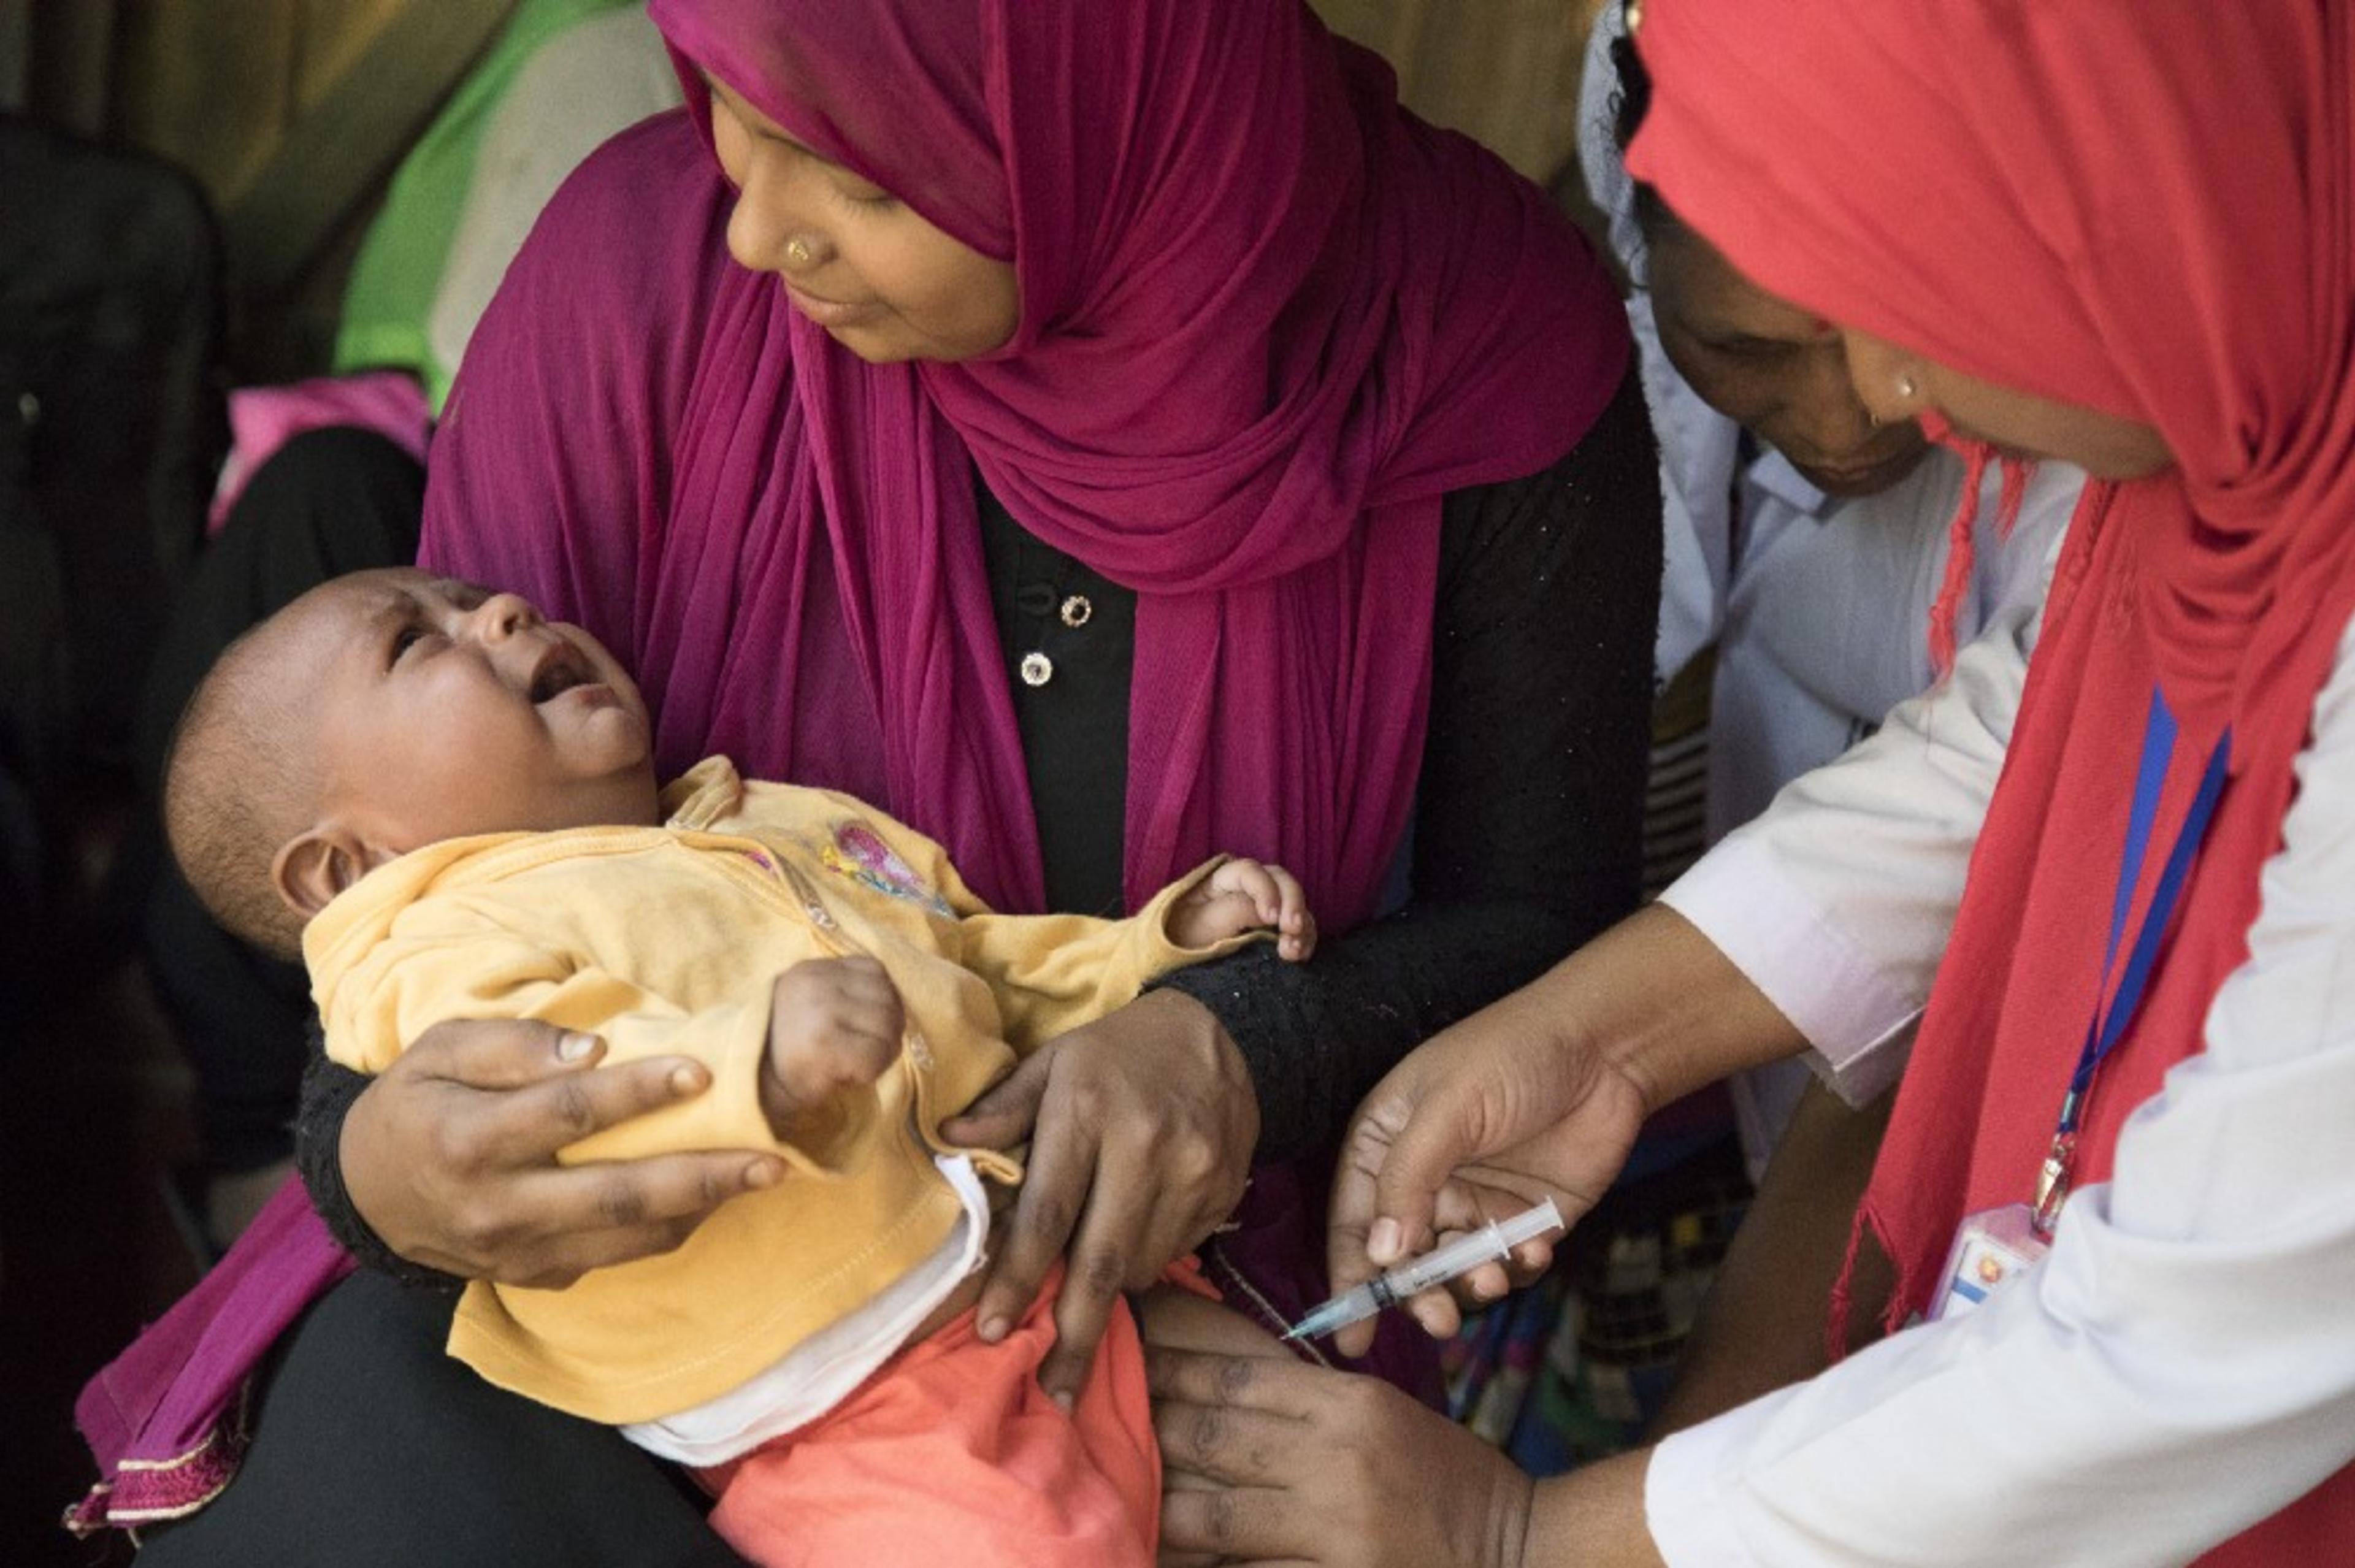 Unicef helps vaccinate almost half of the world’s children each year